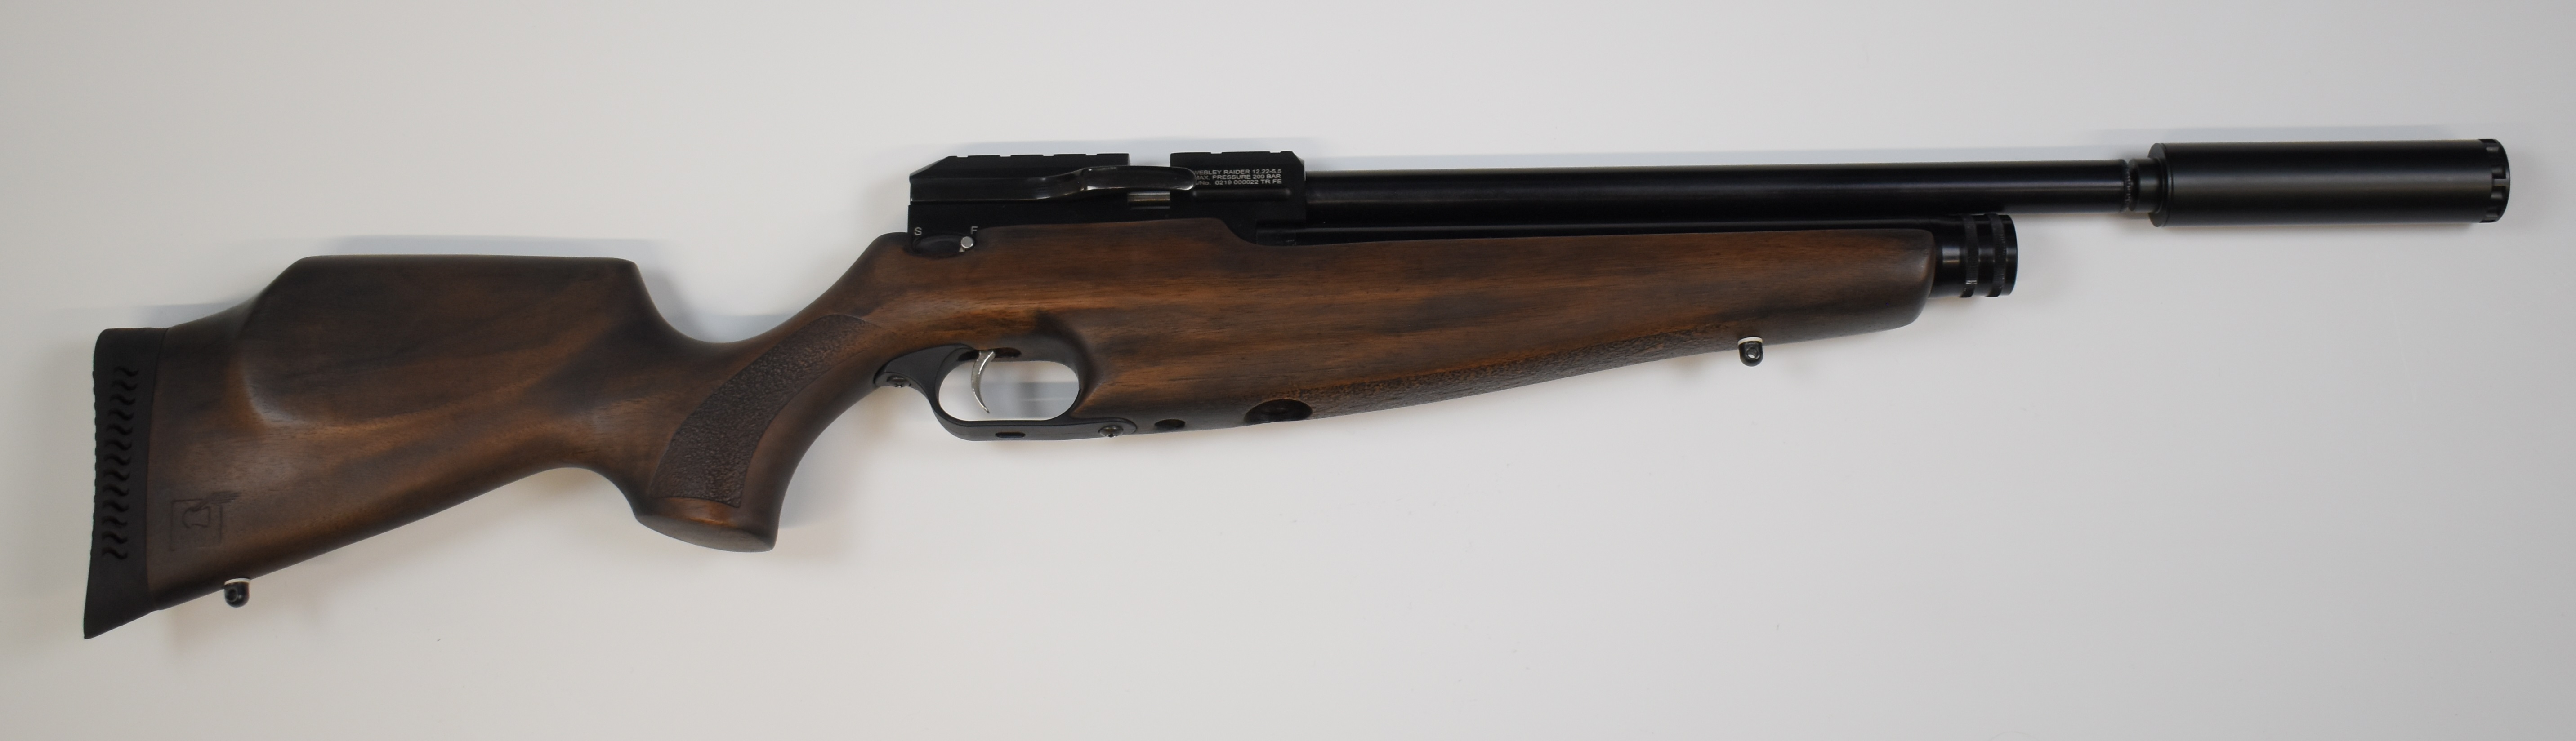 Webley Raider 12 .22 PCP air rifle with aluminium carbine cylinder, textured semi-pistol grip and - Image 2 of 11